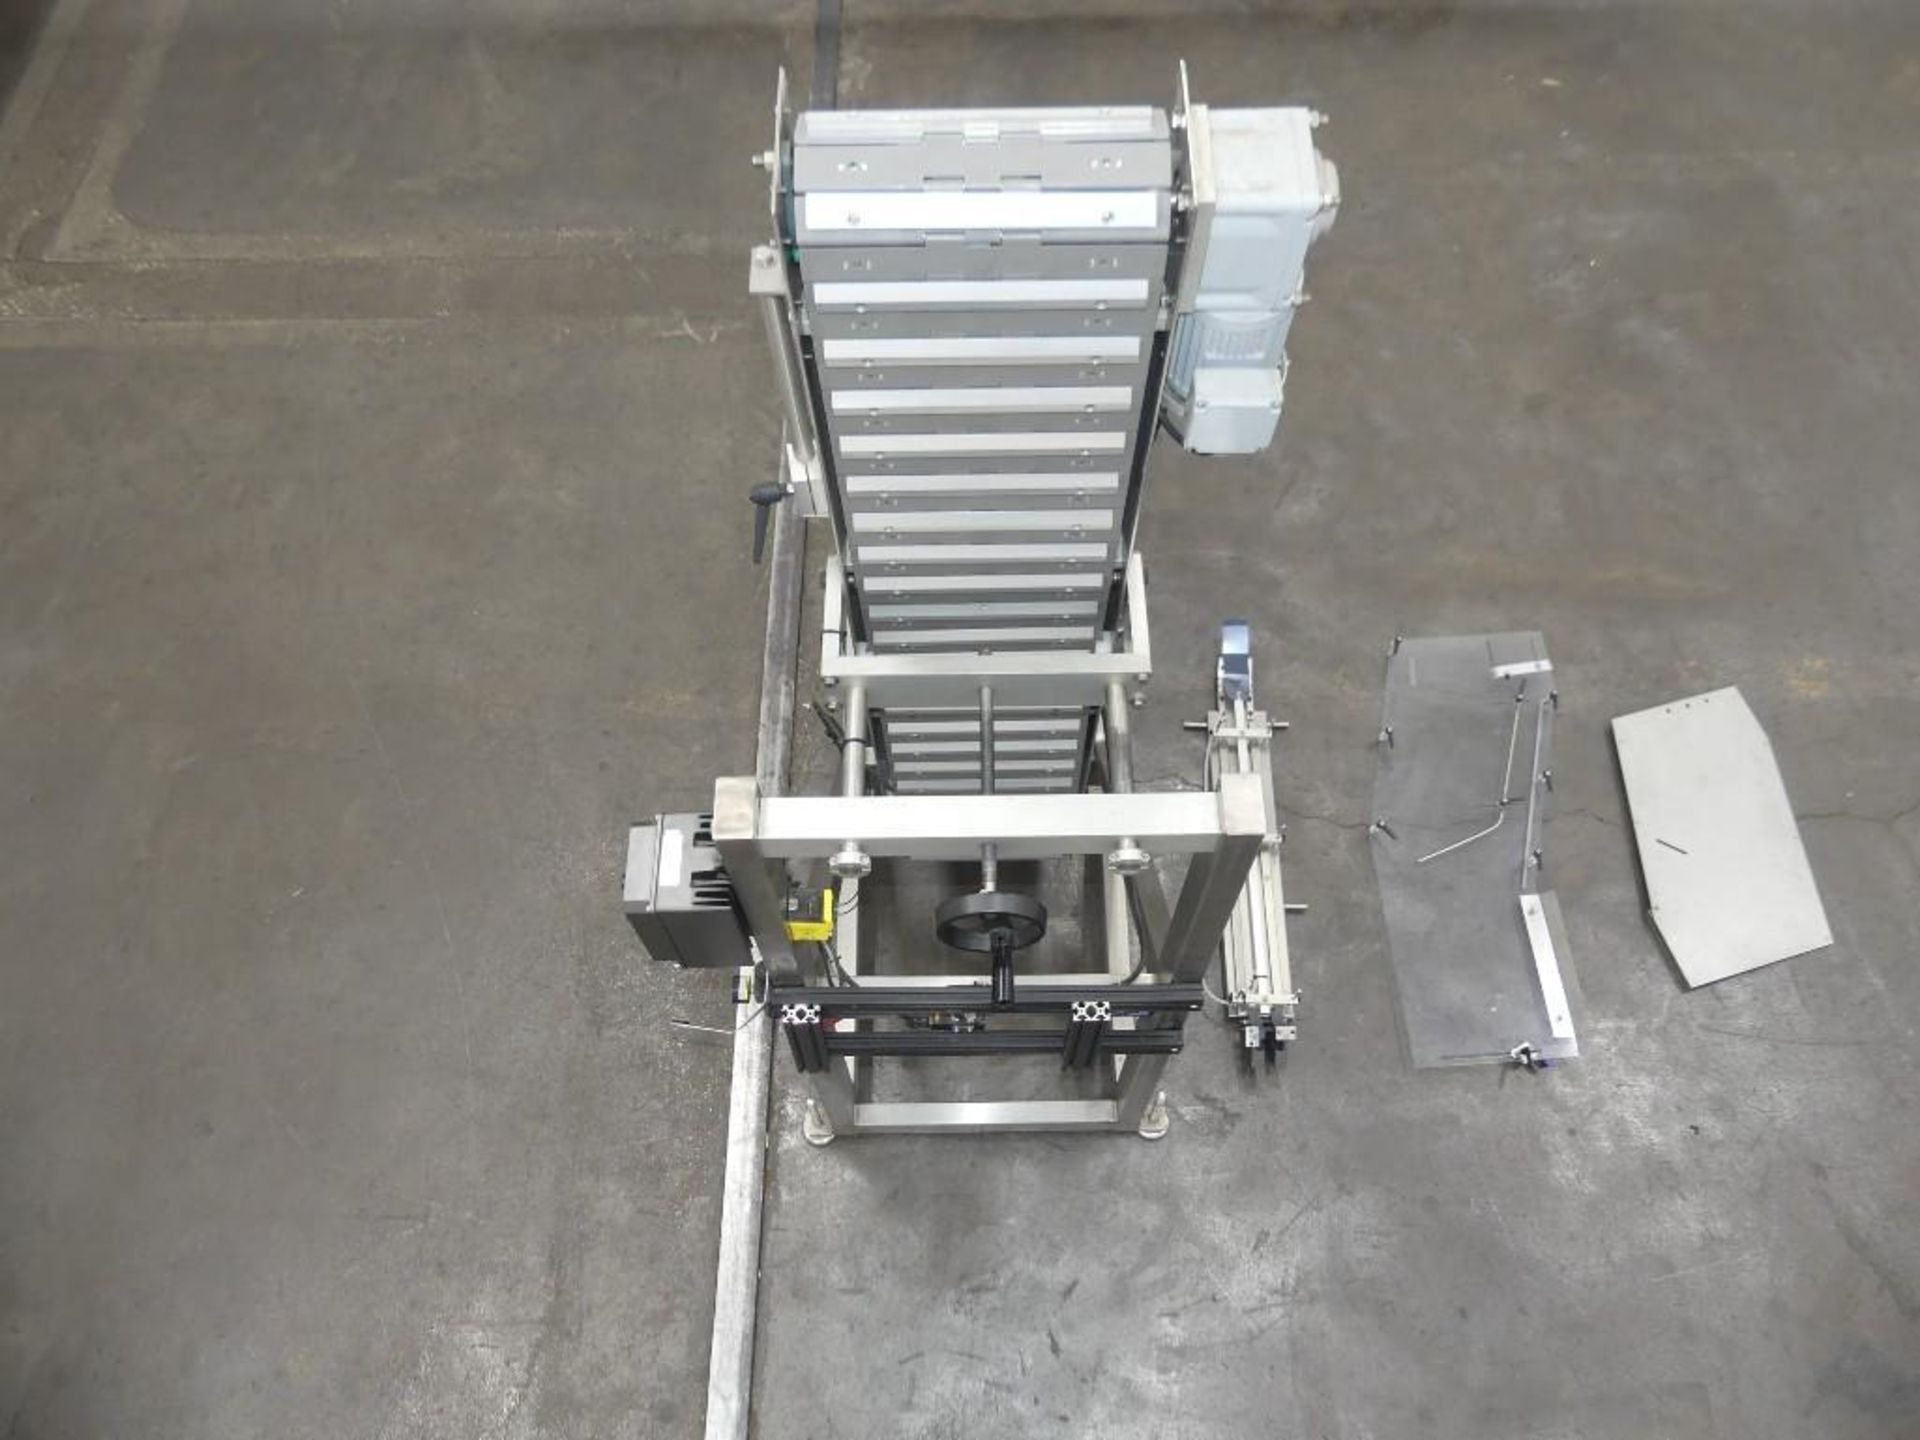 2019 AccuTek Packaging Equipment Co. 50-C0E-CH2 Stainless Steel Cap Loader Elevator - Image 9 of 25